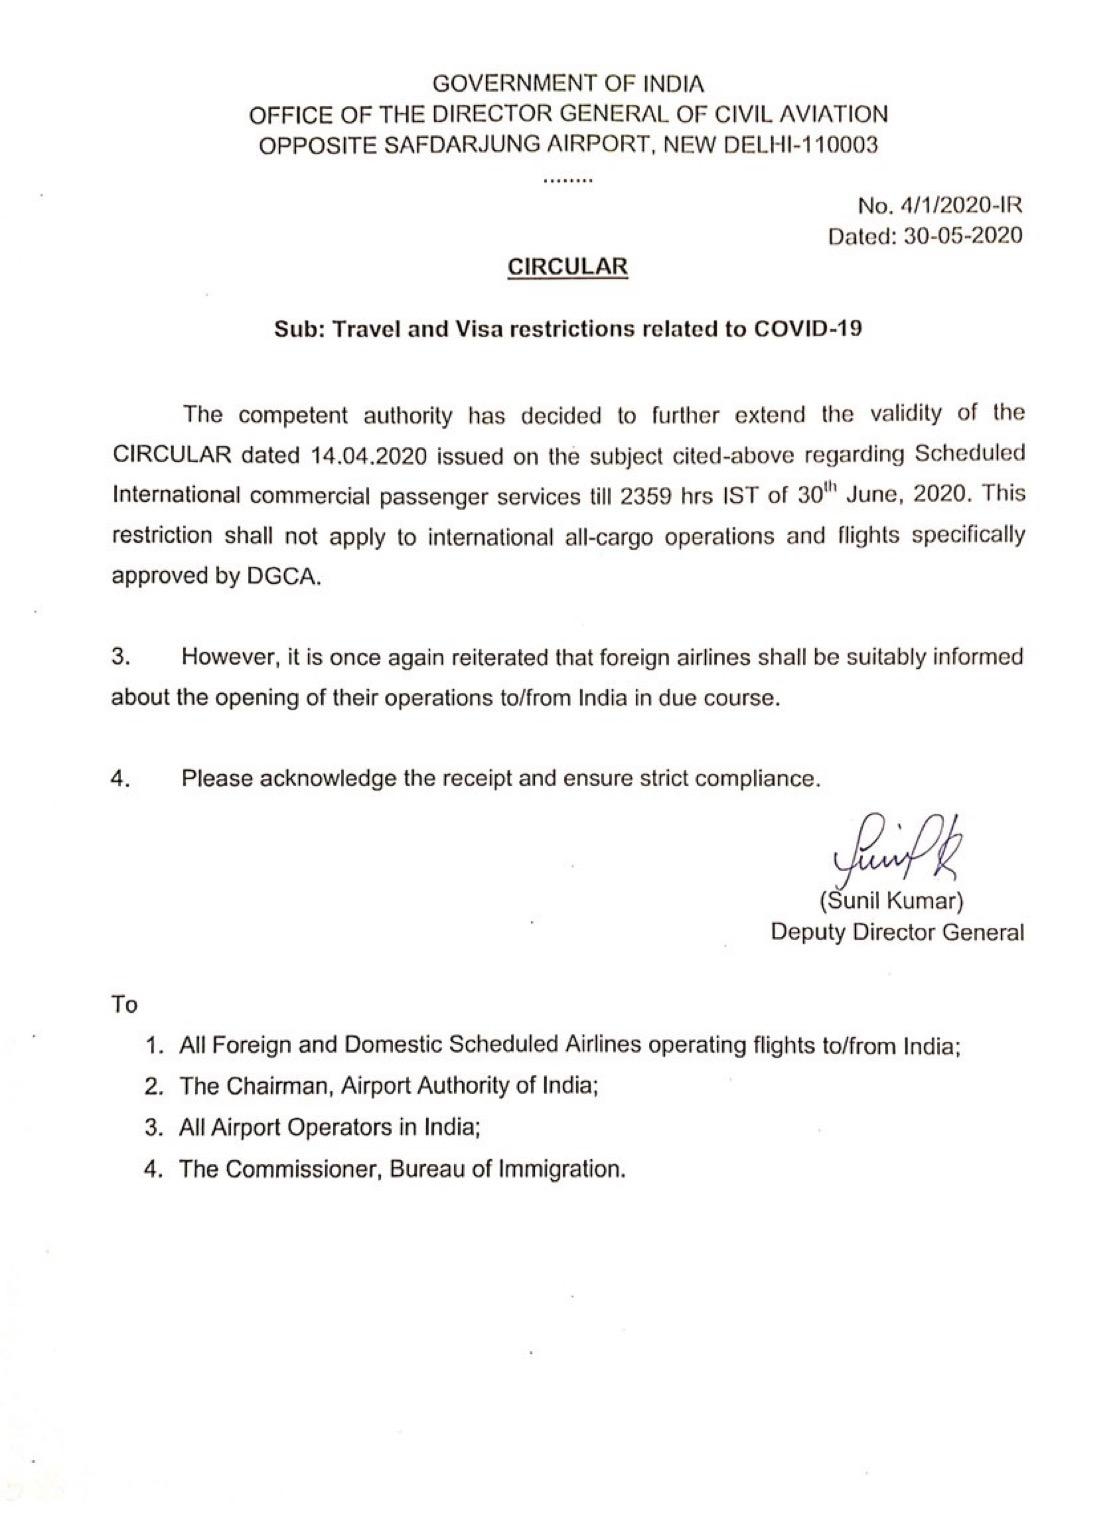 Additional Advisory on COVID-19: Ban on all international commercial passenger aircraft extended till June 30, 2020